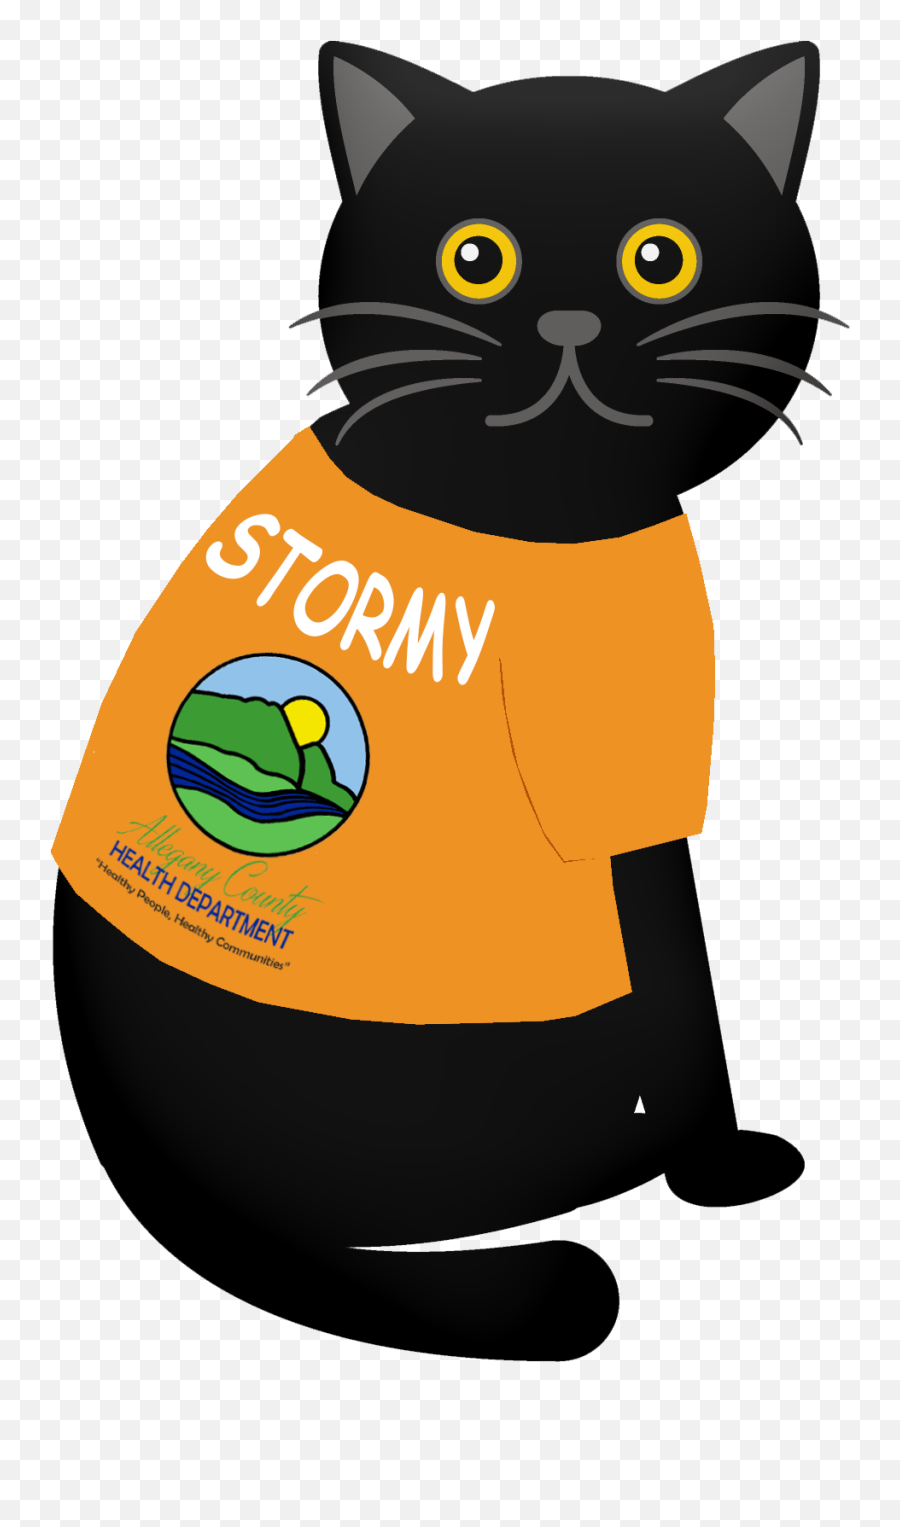 Download Stormy The Preparedness Kitty - Black Cat Hd Png Black Cat Face Clip Art,Kitty Png